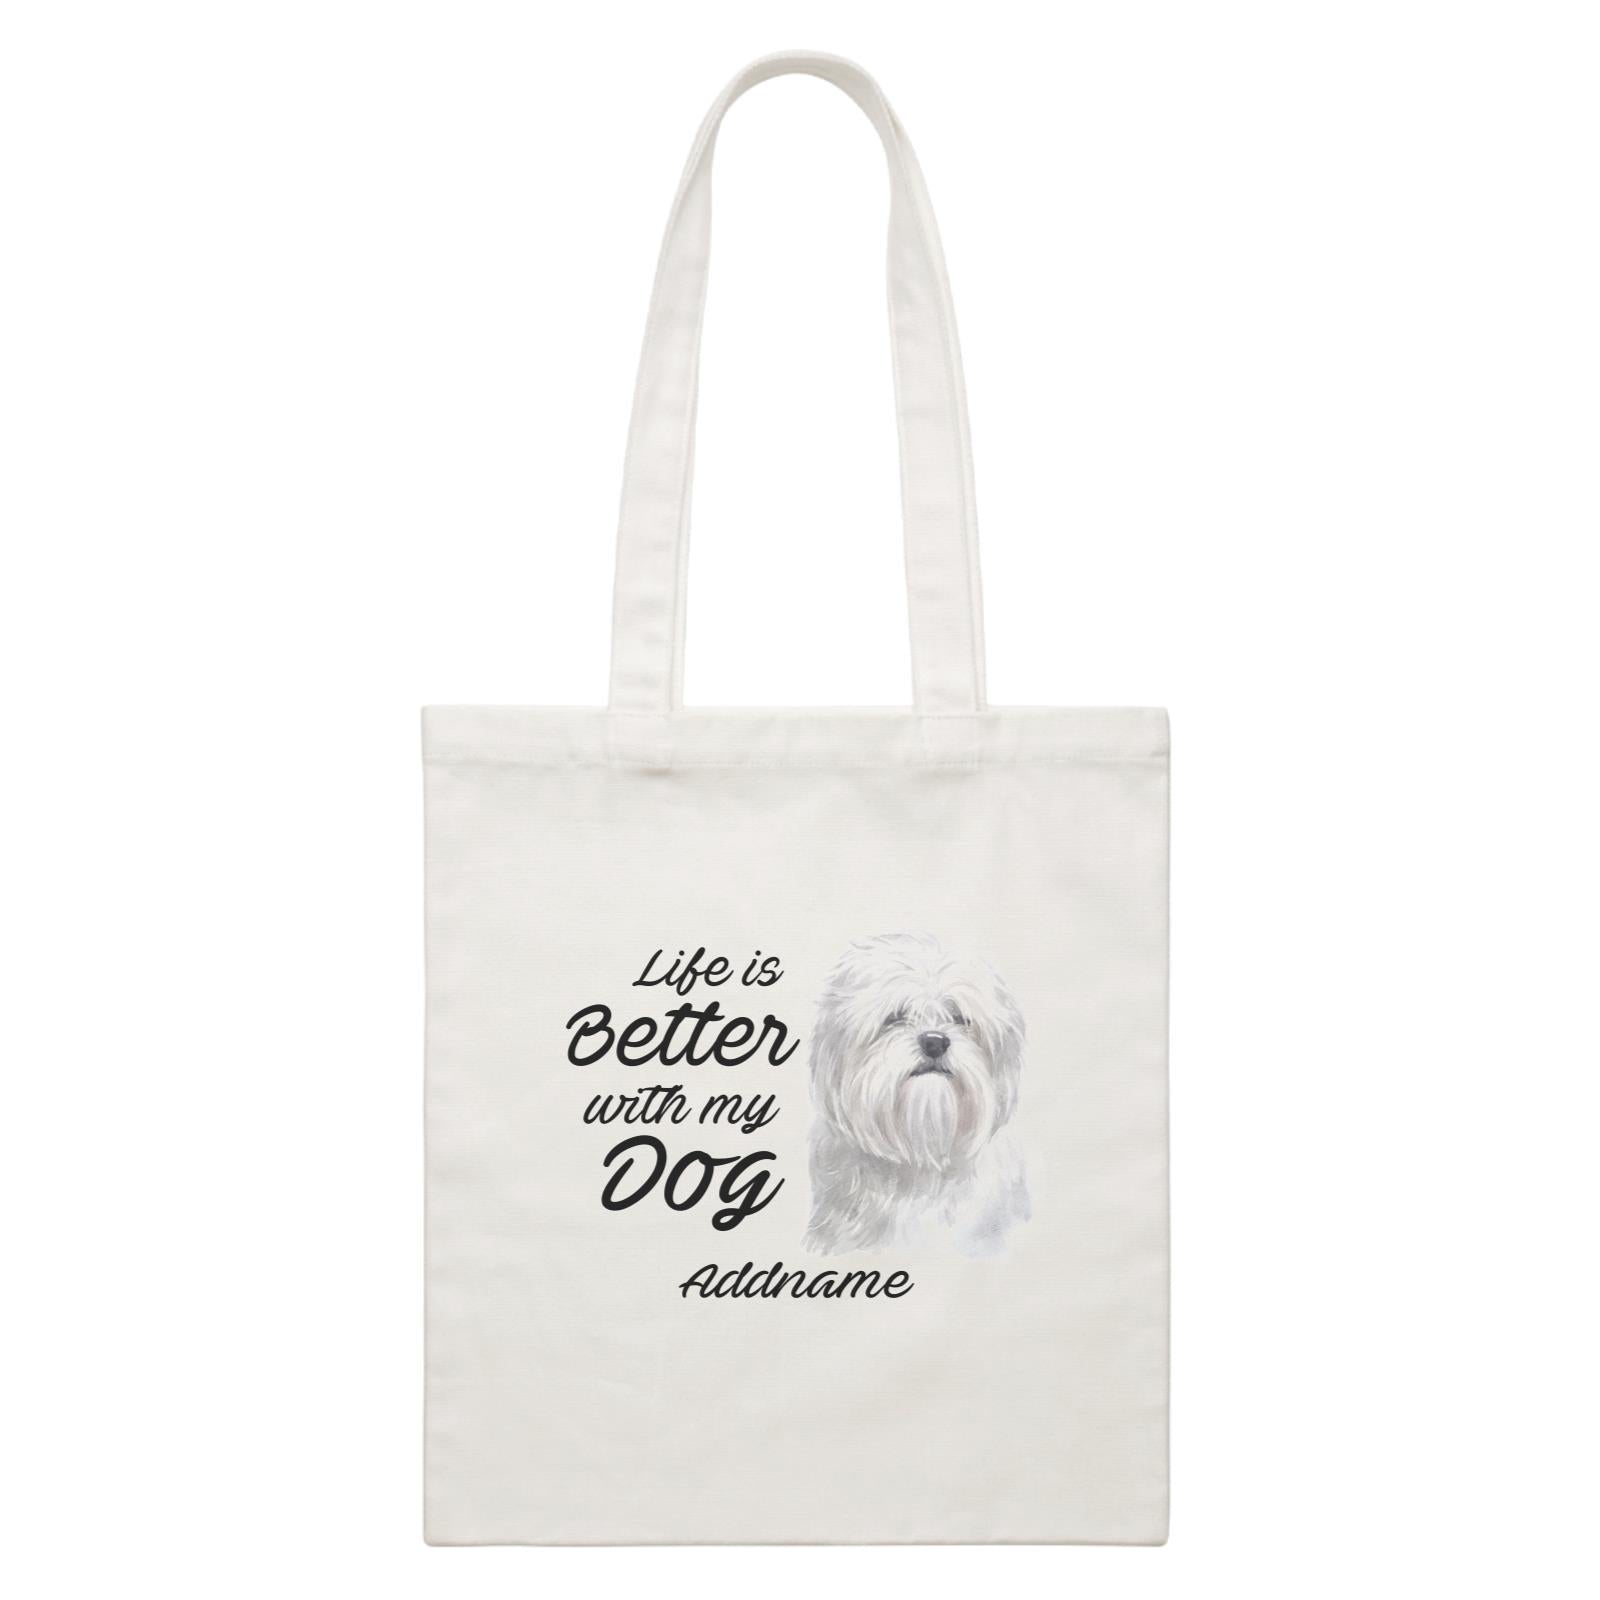 Watercolor Life is Better With My Dog Lhasa Apso Addname White Canvas Bag